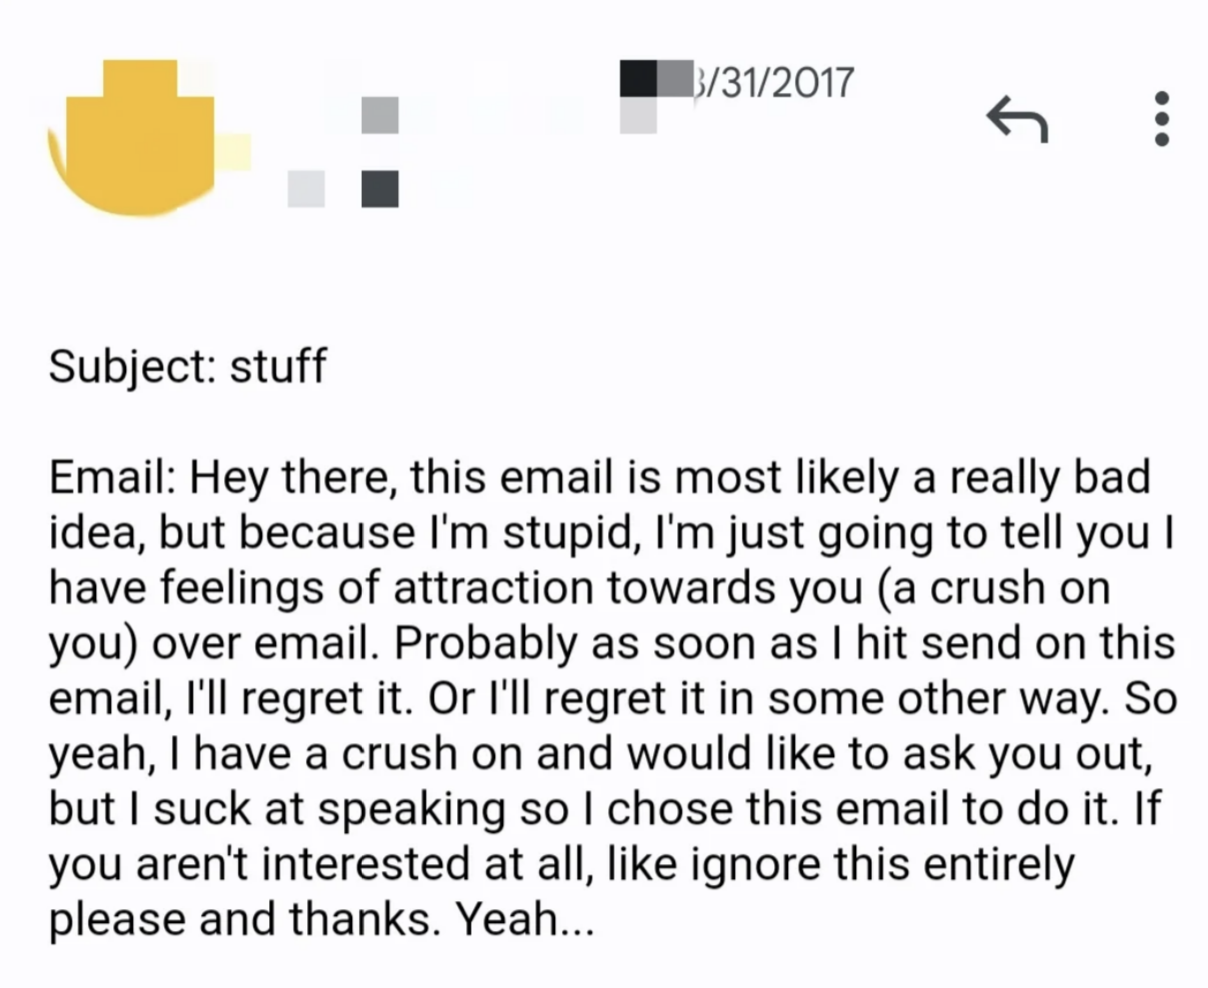 i&#x27;m just going to tell you i have feelings of attraction towards you over email. probably as soon as i hit send on this i&#x27;ll regret it